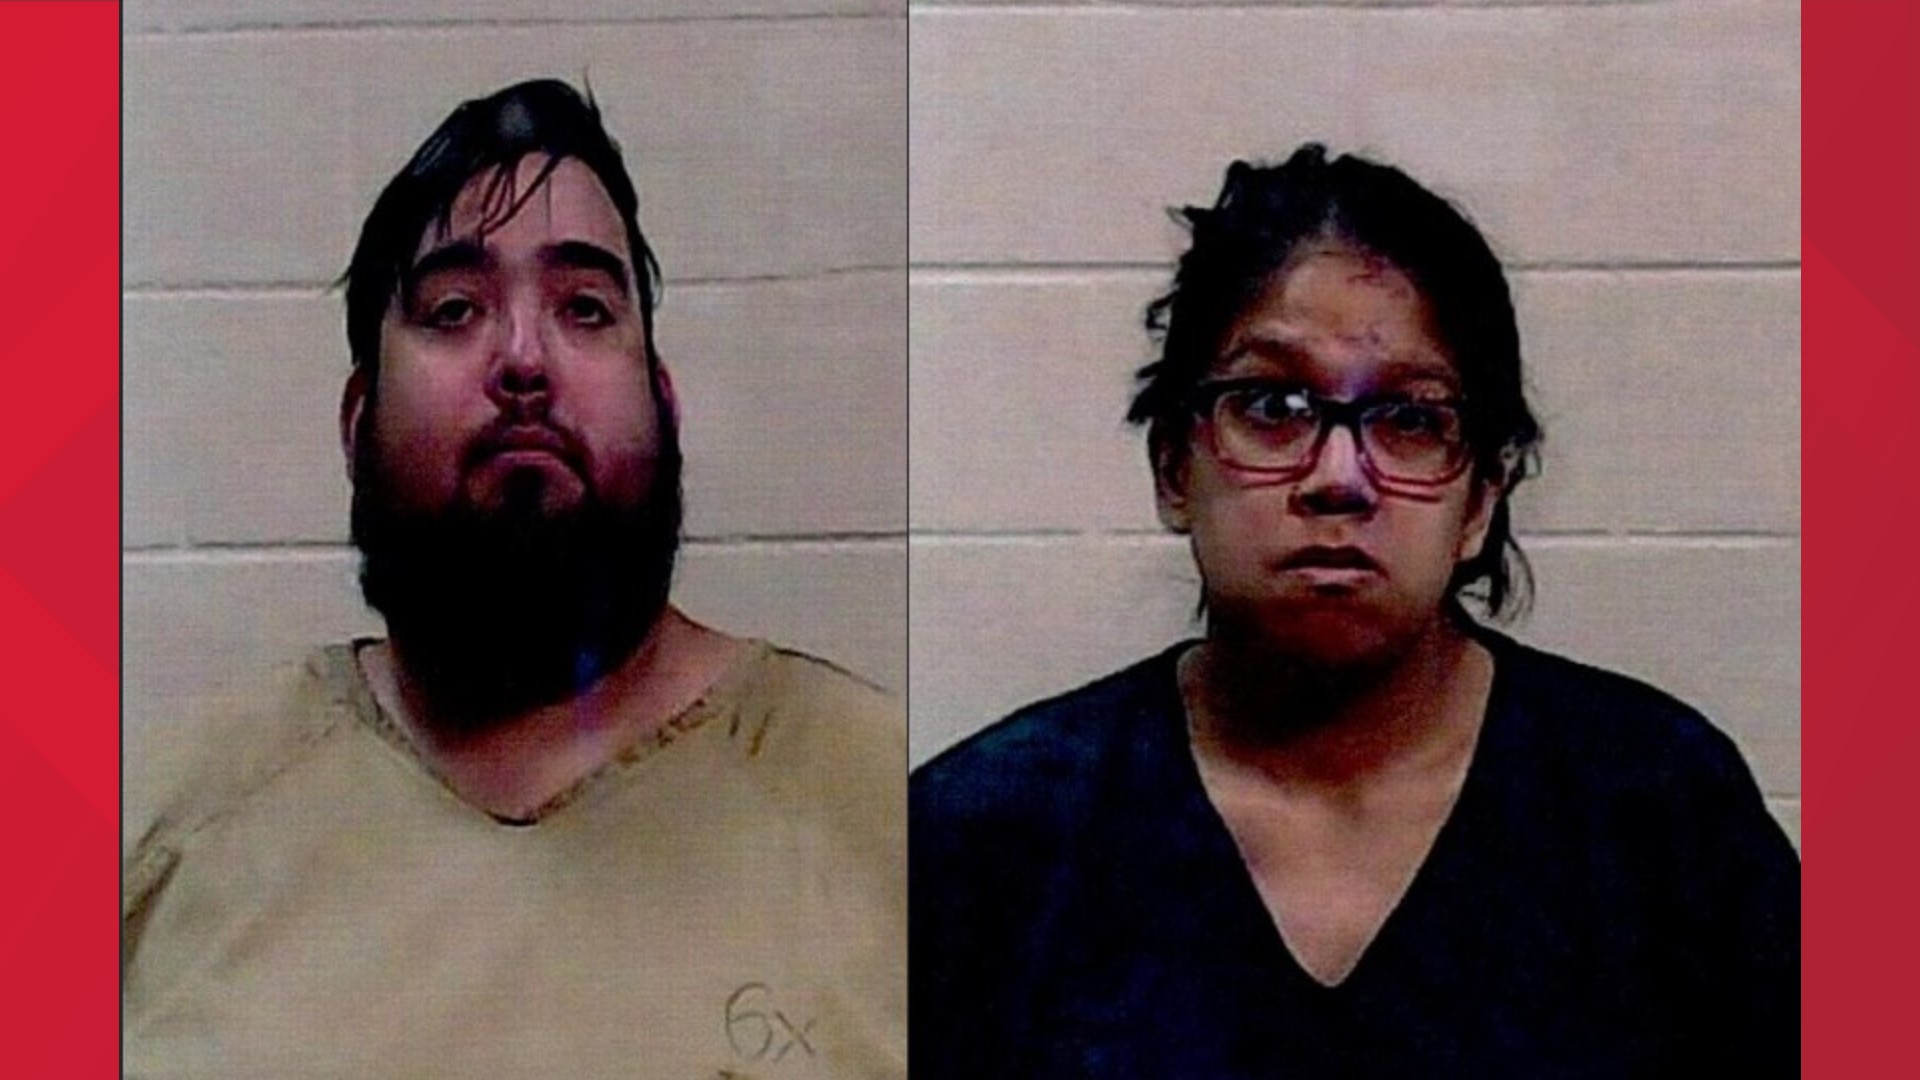 Justin Raines, Elvira Luera and Christine Claros are all charged with knowingly causing serious bodily injury to a disabled person, a first-degree felony.